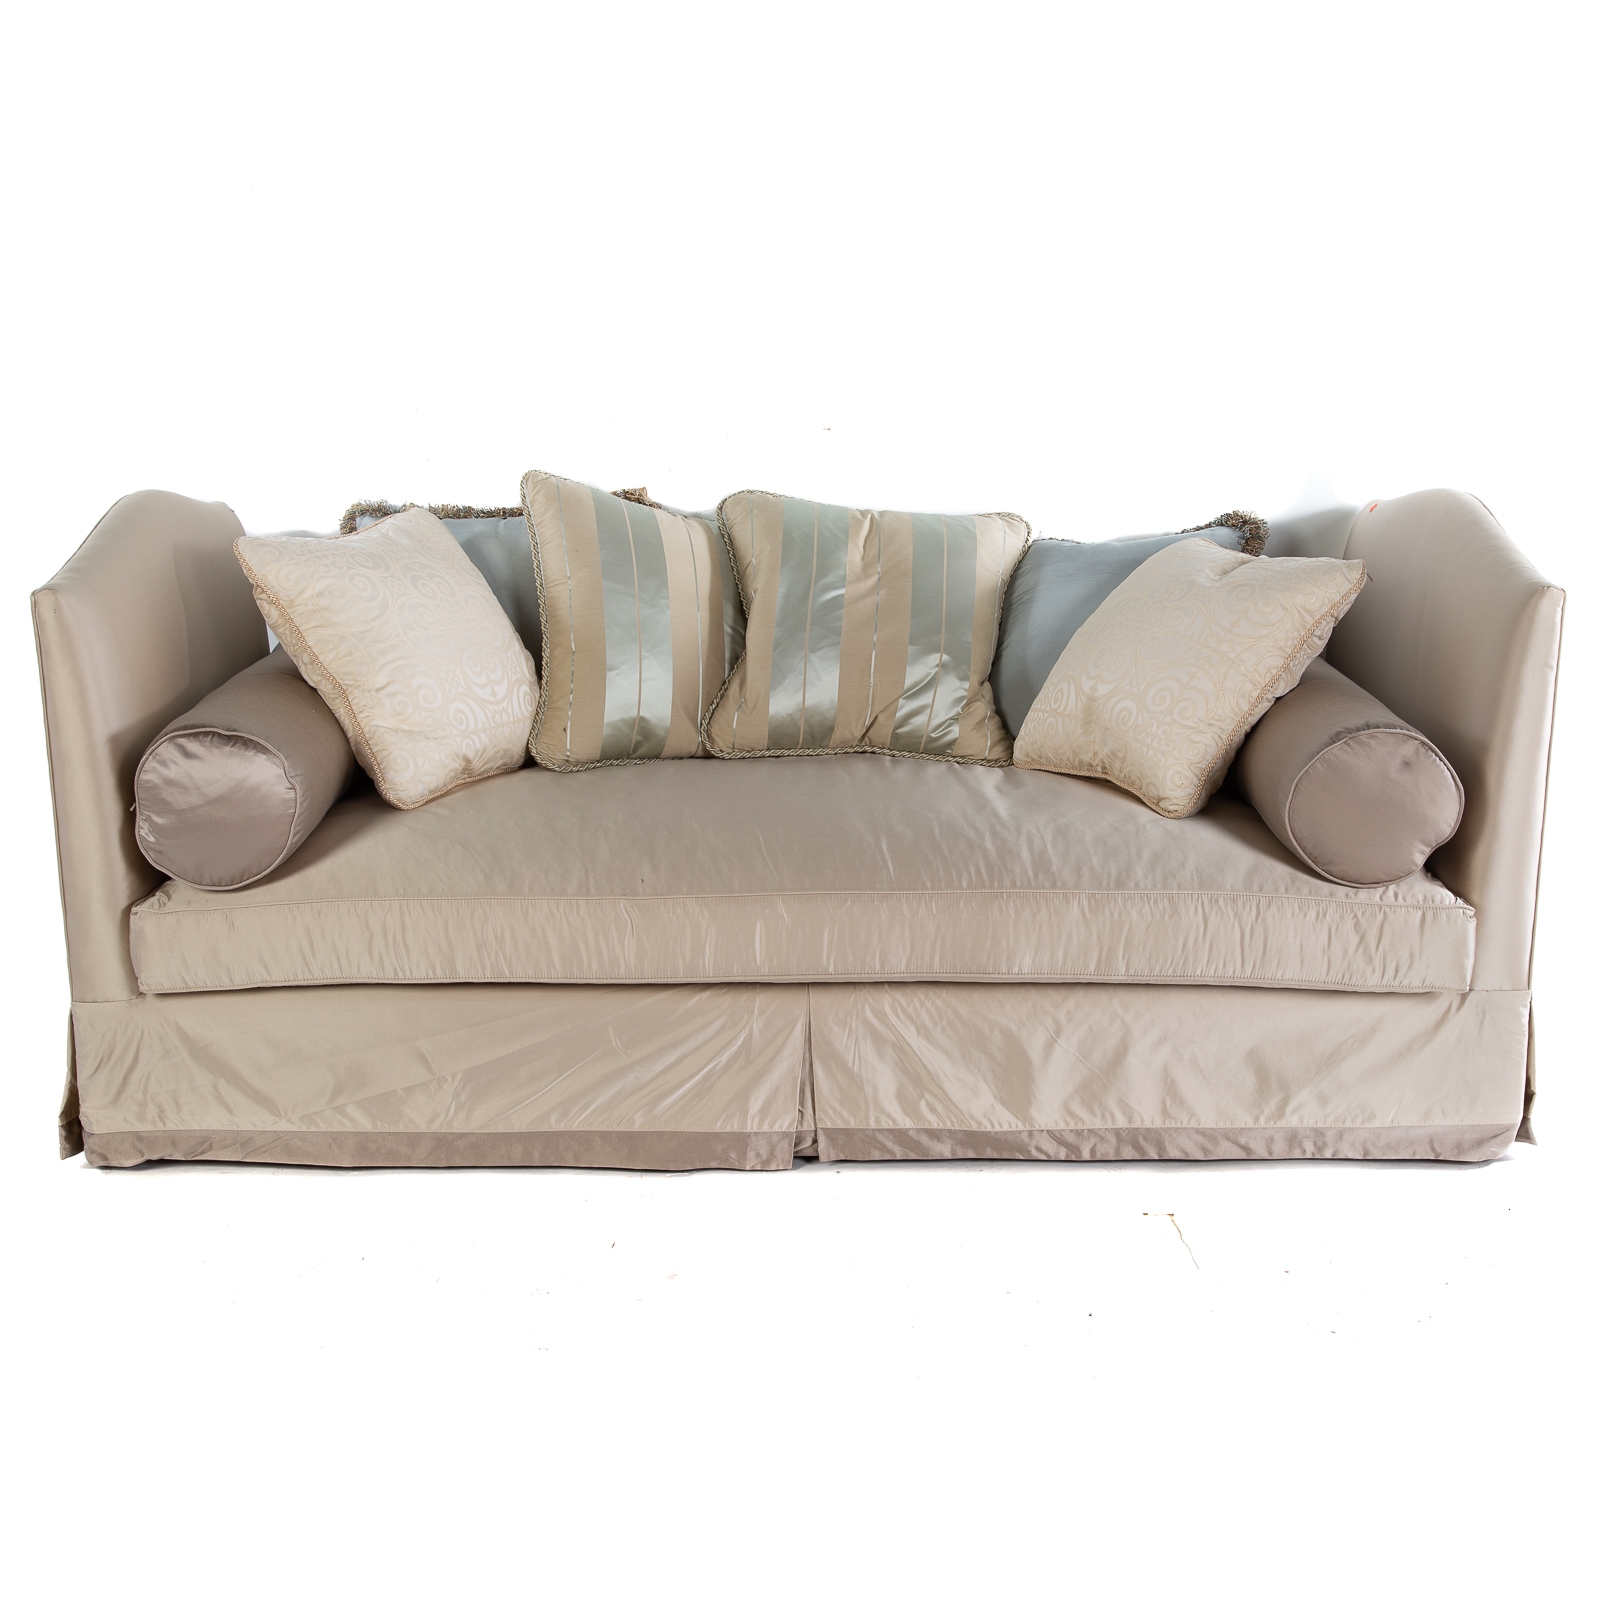 SWAIN SILK UPHOLSTERED DAY BED